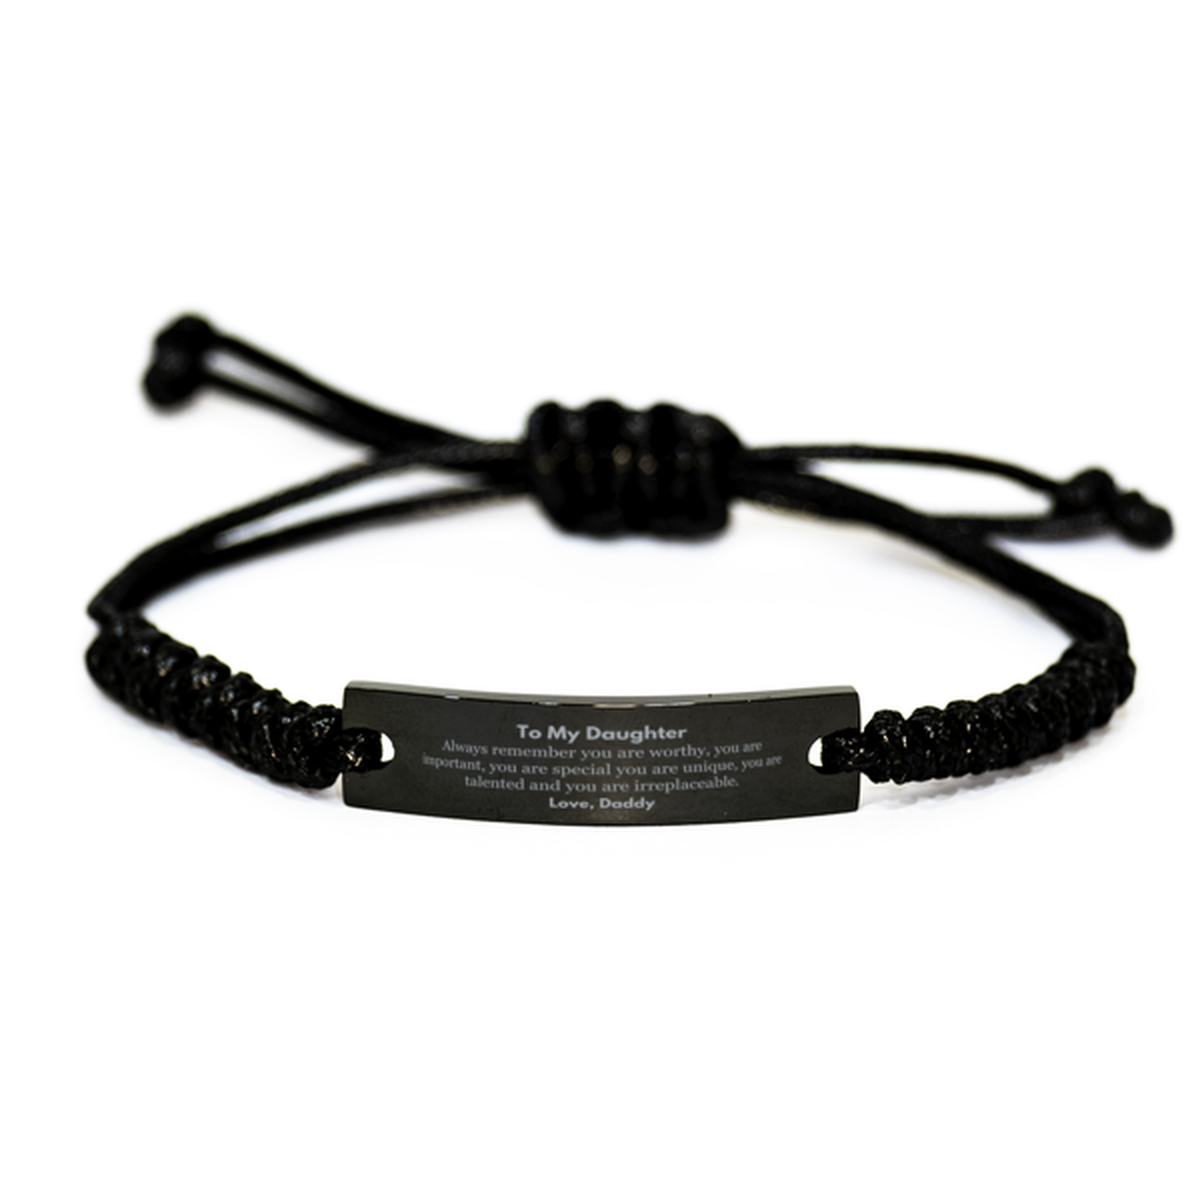 Daughter Birthday Gifts from Daddy, Inspirational Black Rope Bracelet for Daughter Christmas Graduation Gifts for Daughter Always remember you are worthy, you are important. Love, Daddy